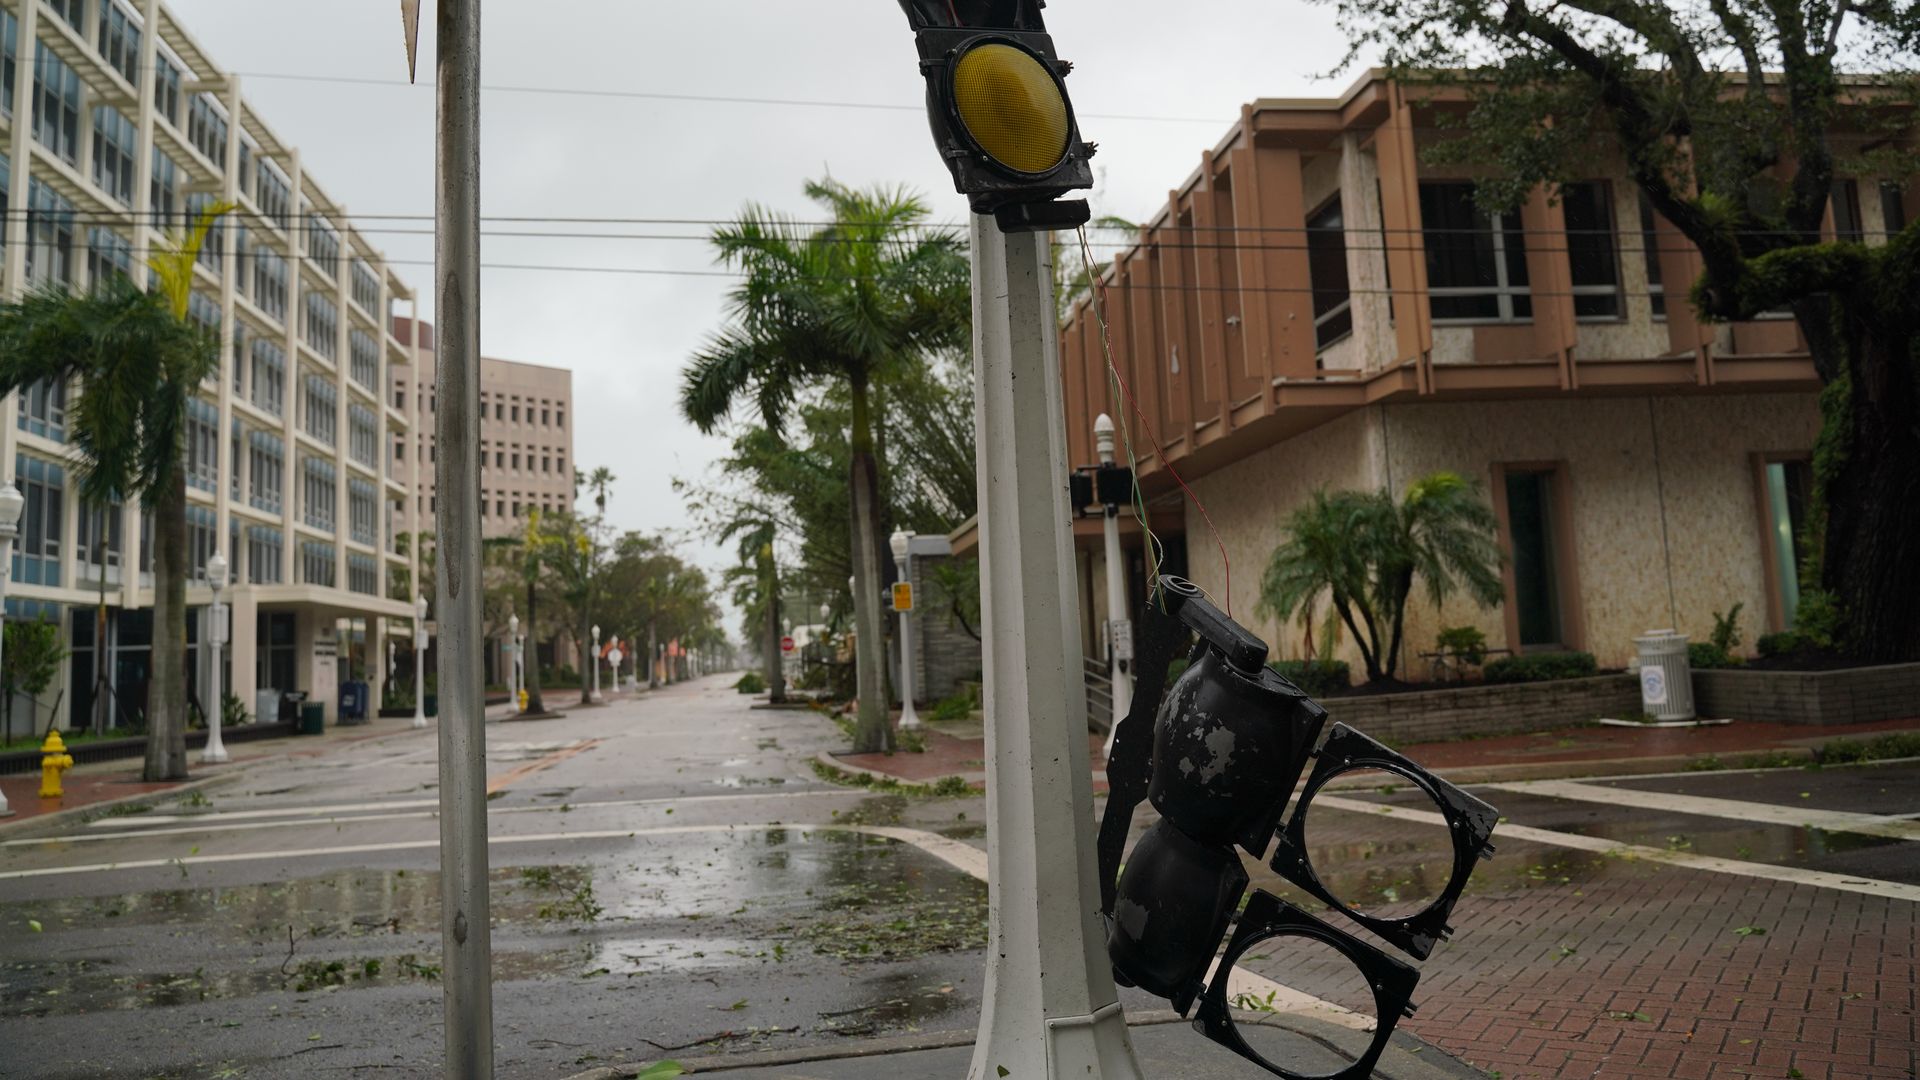 A traffic light is torn in half in a Florida street after Hurricane Ian swept through Wednesday.